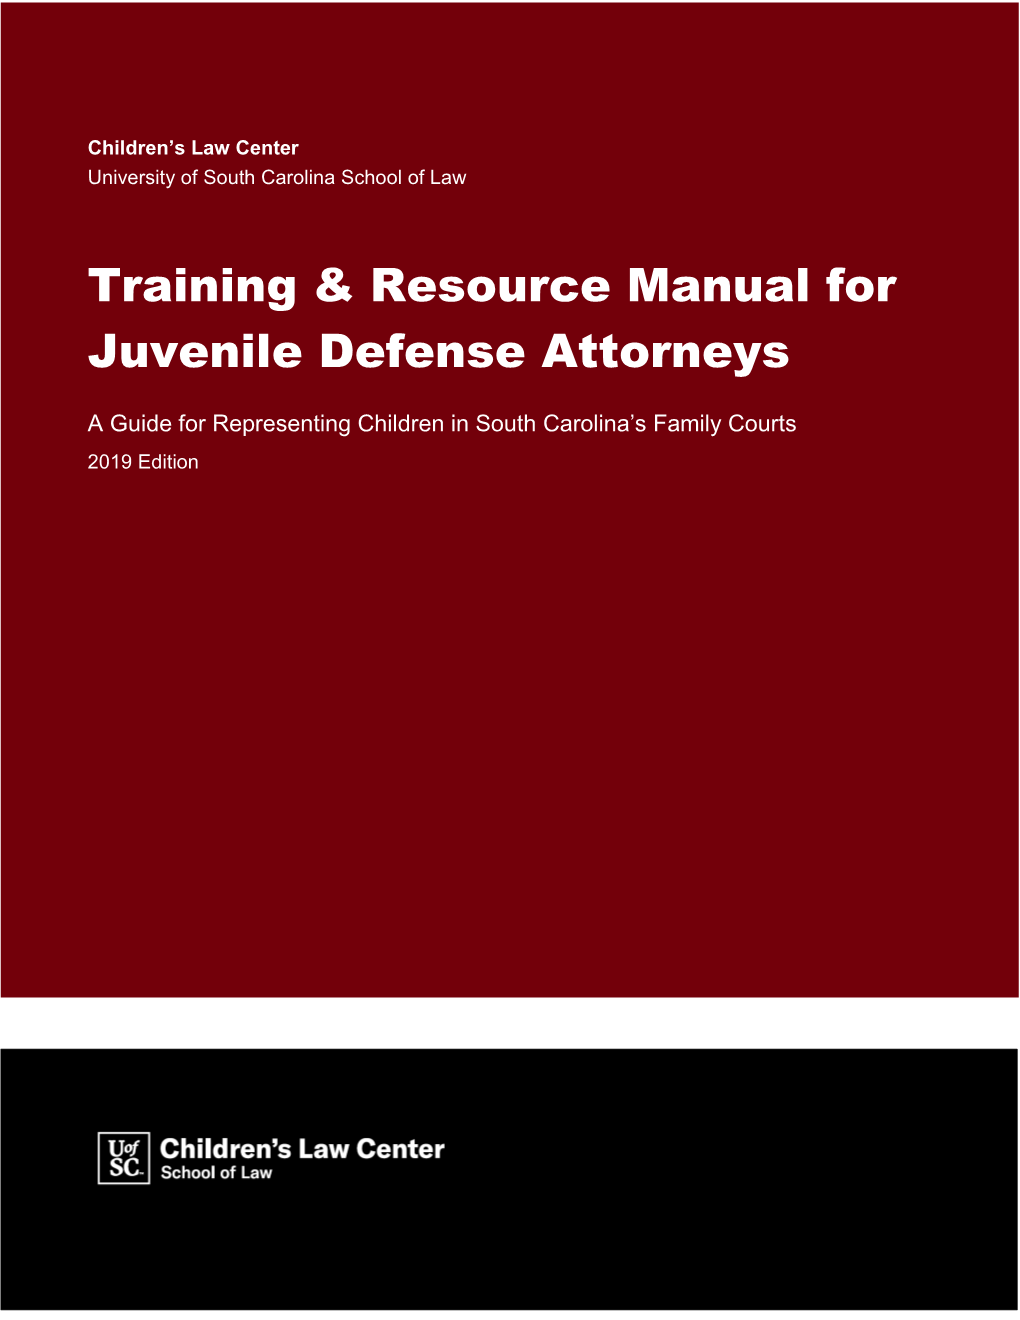 Quick Reference Guide to the Juvenile Justice System in South Carolina